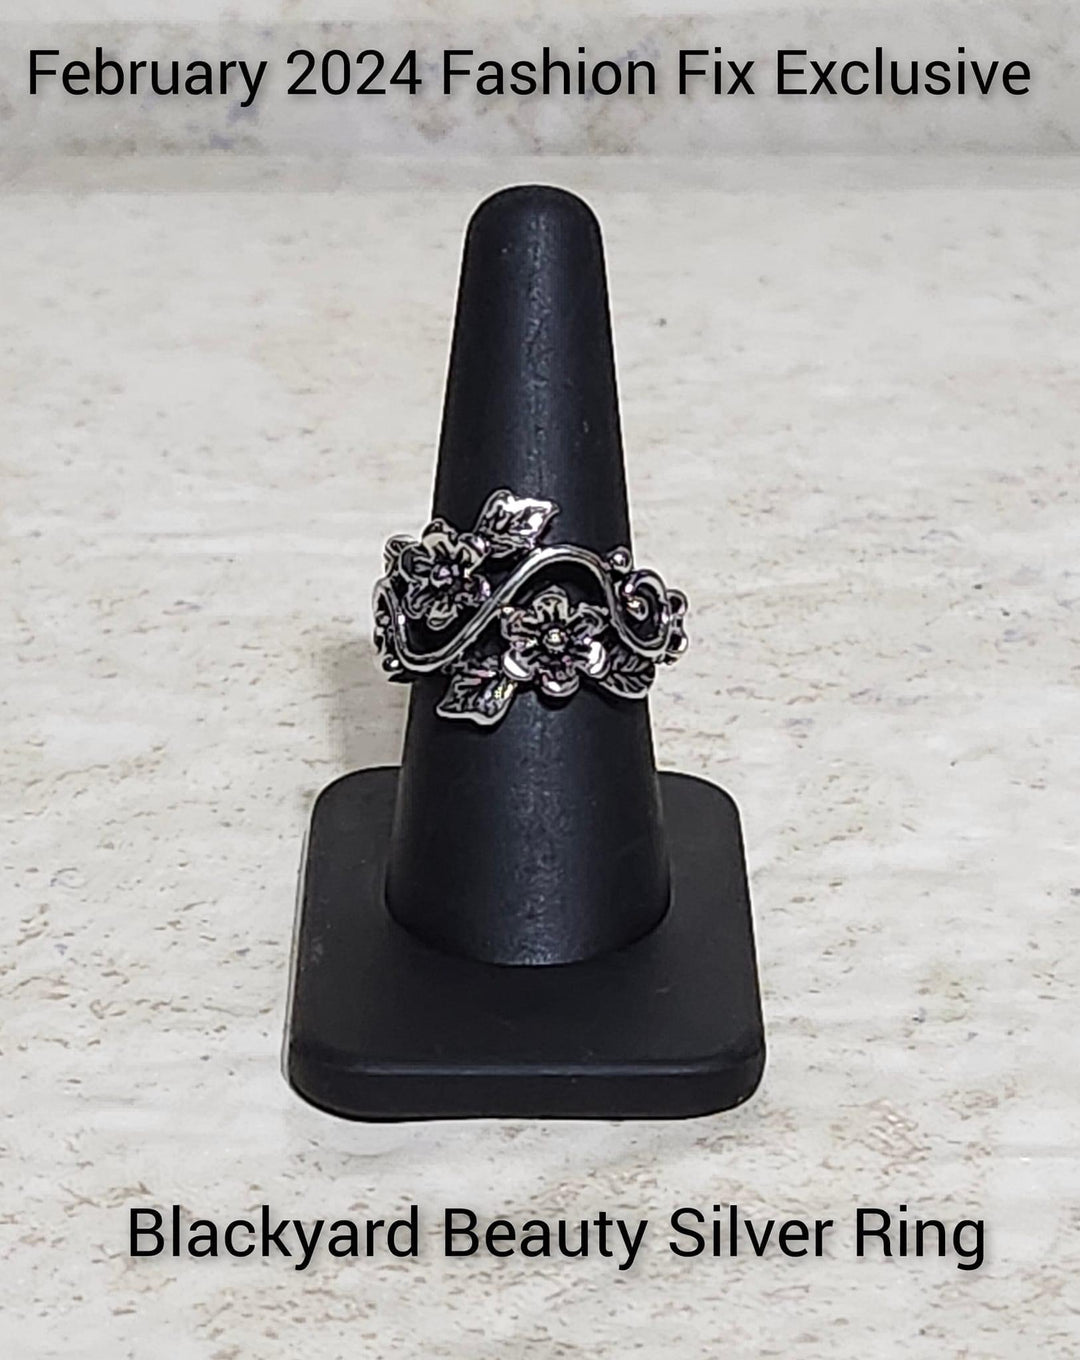 Backyard Beauty - Silver Flower Ring - Paparazzi Accessories - Brushed in an antiqued finish, leafy silver flowers and leaves bloom across the finger on an airy silver vine for a seasonal look. Features a dainty stretchy band for a flexible fit. Sold as one individual ring.